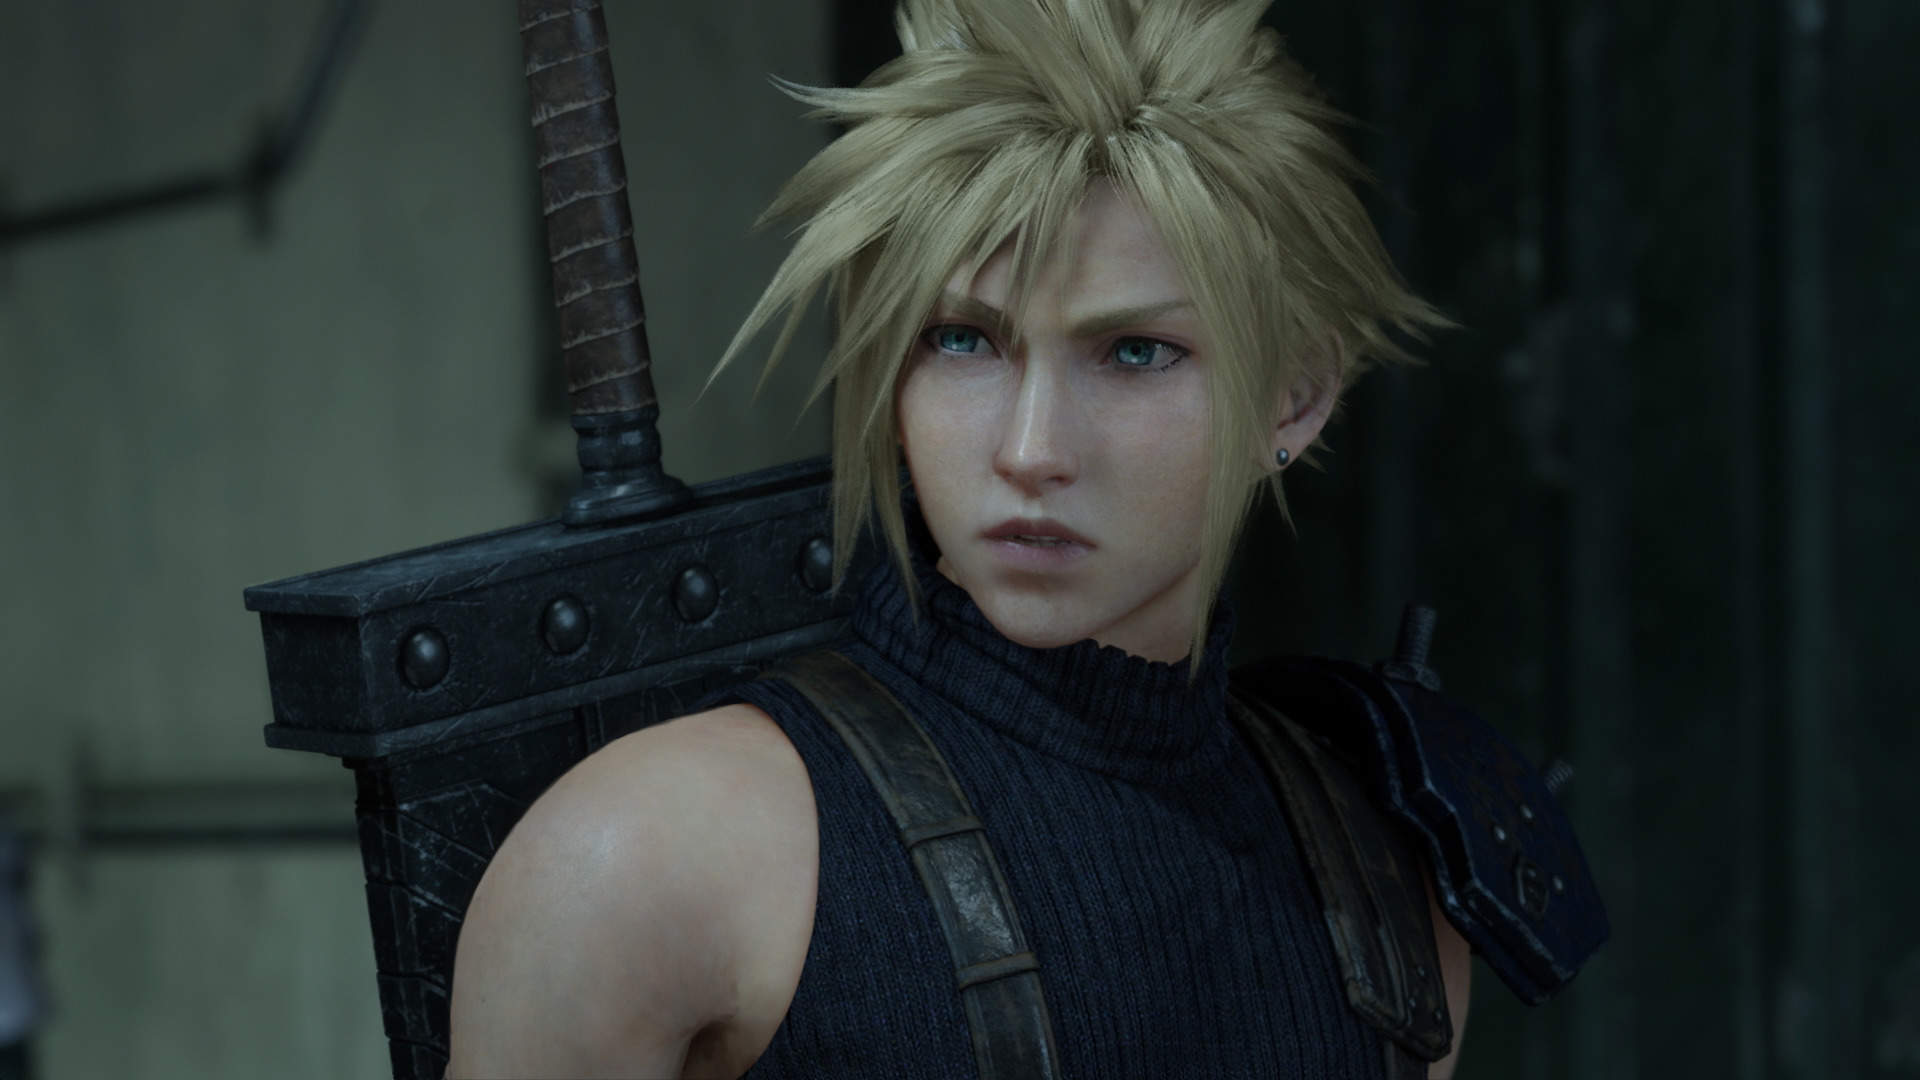 Image for Nomura says Final Fantasy 7 Remake will be released in small chunks to speed up development